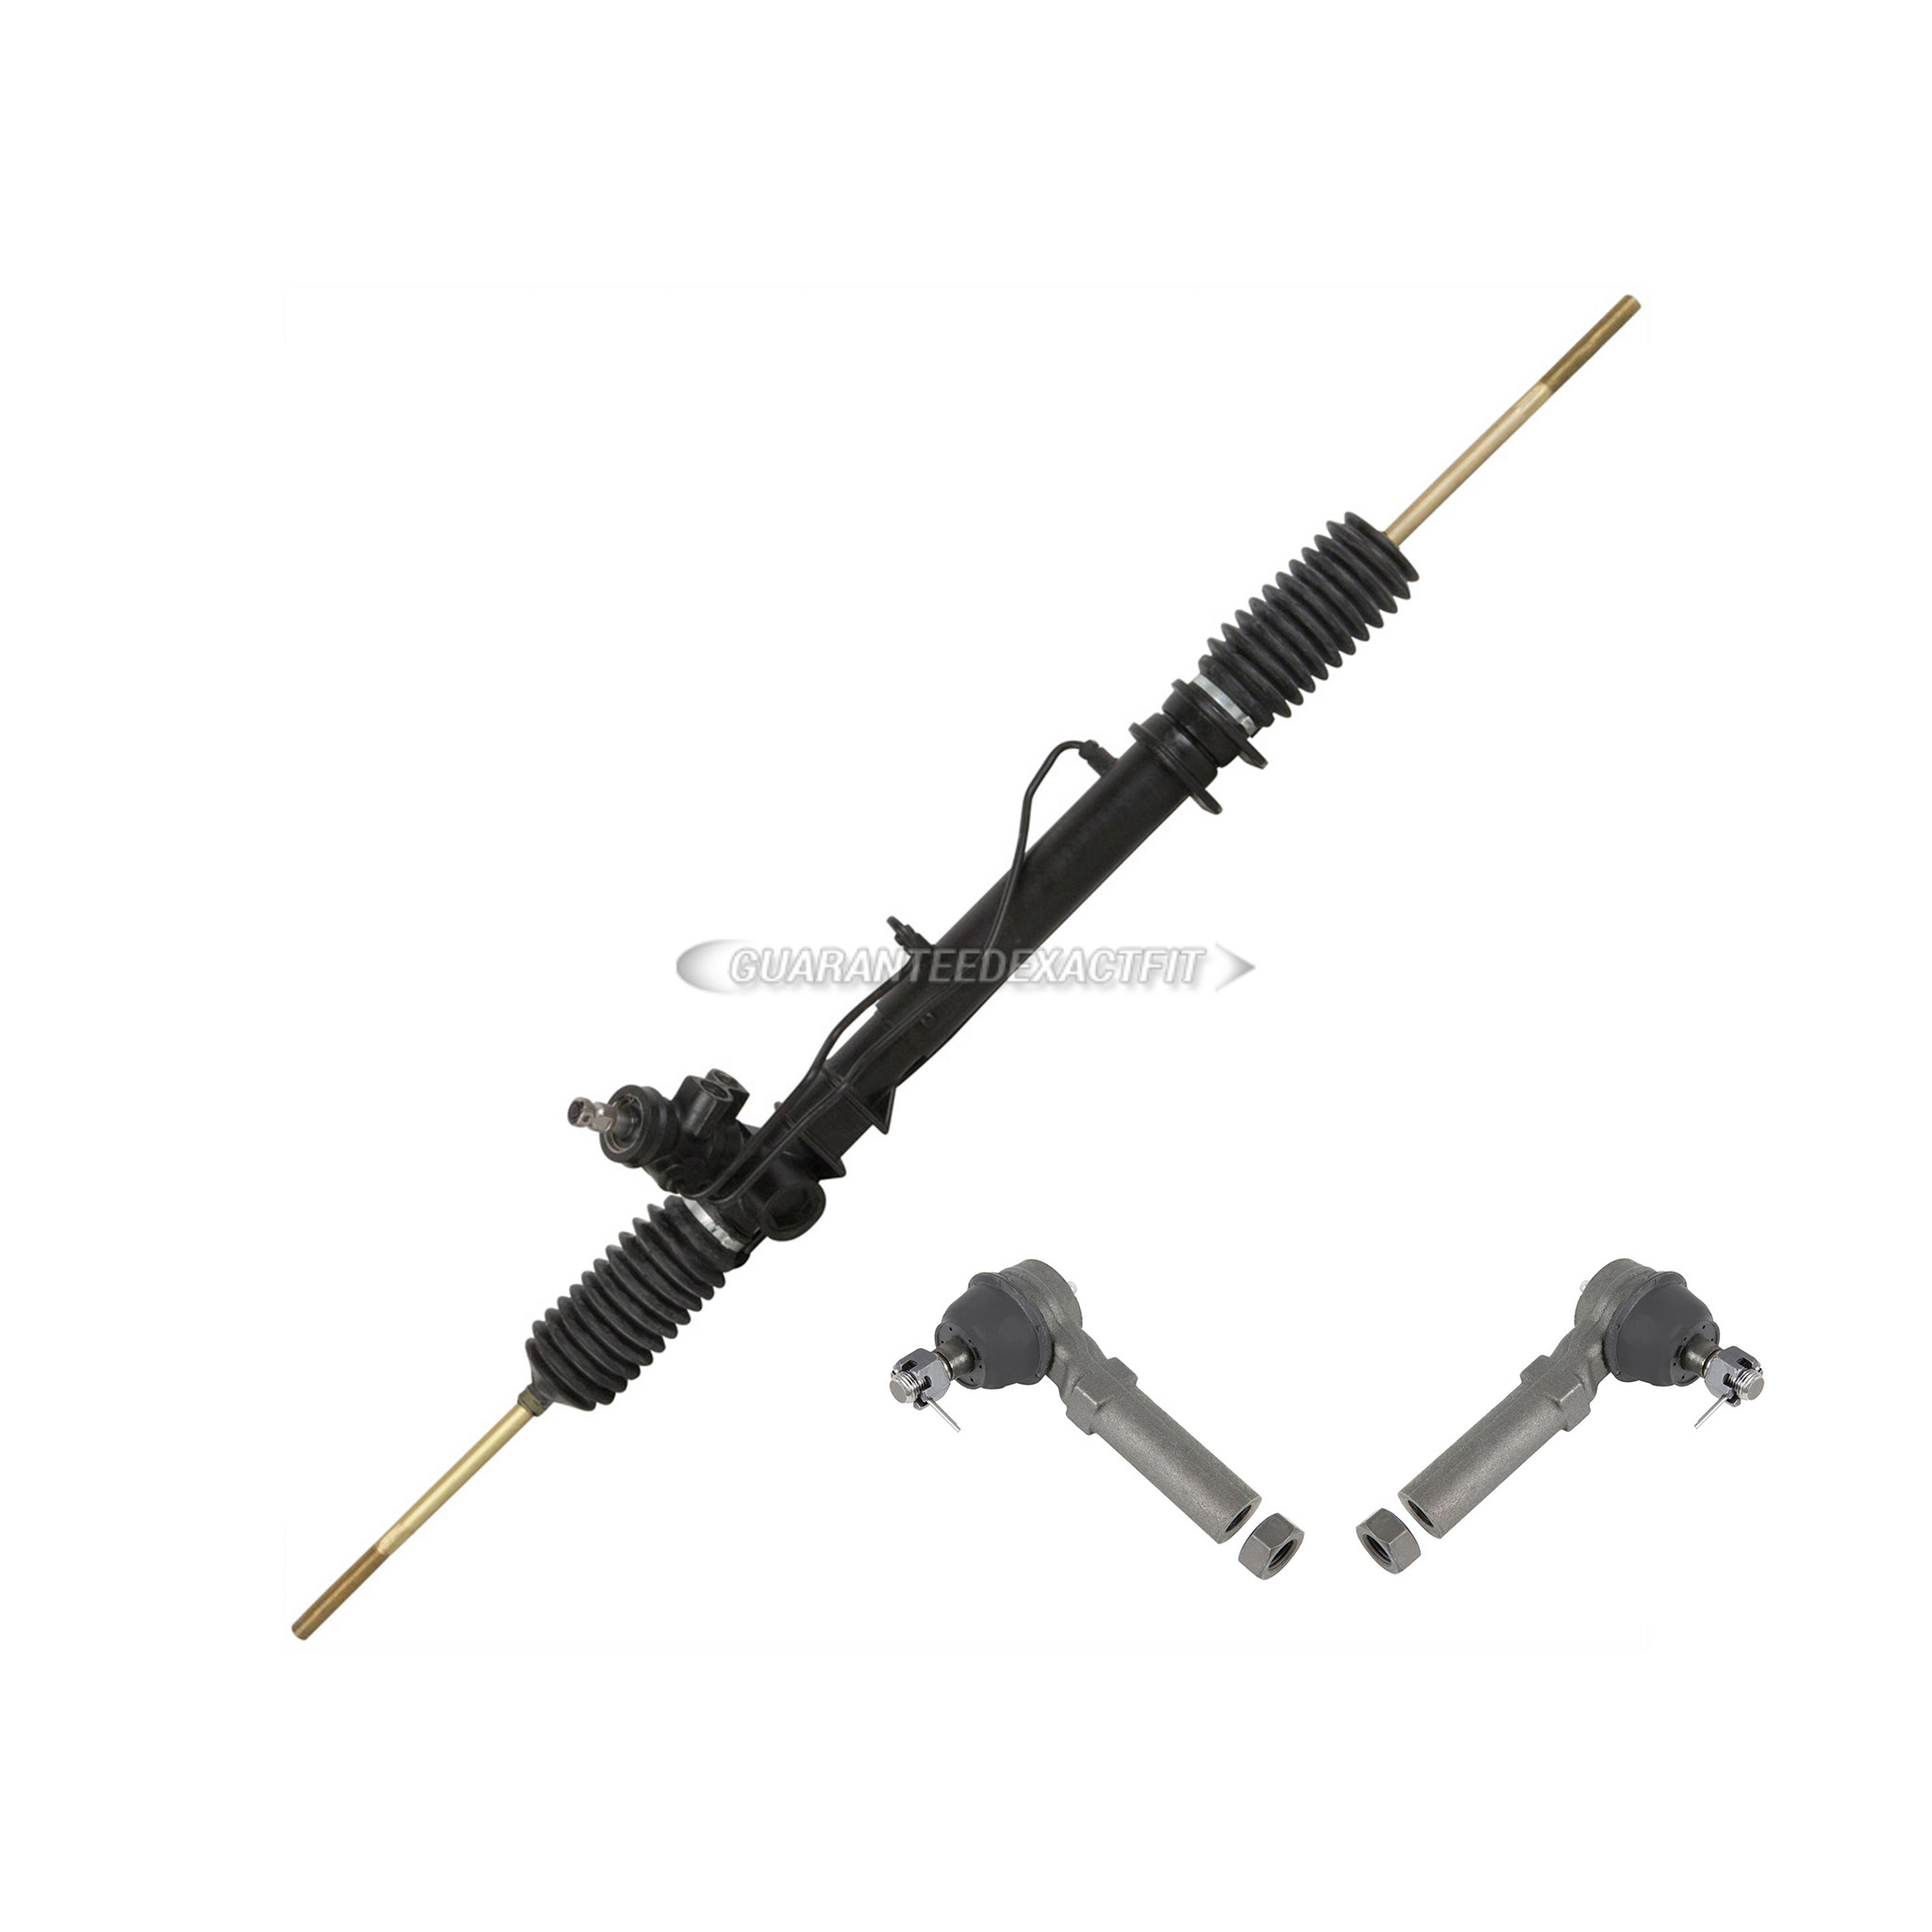  Chrysler new yorker rack and pinion and outer tie rod kit 